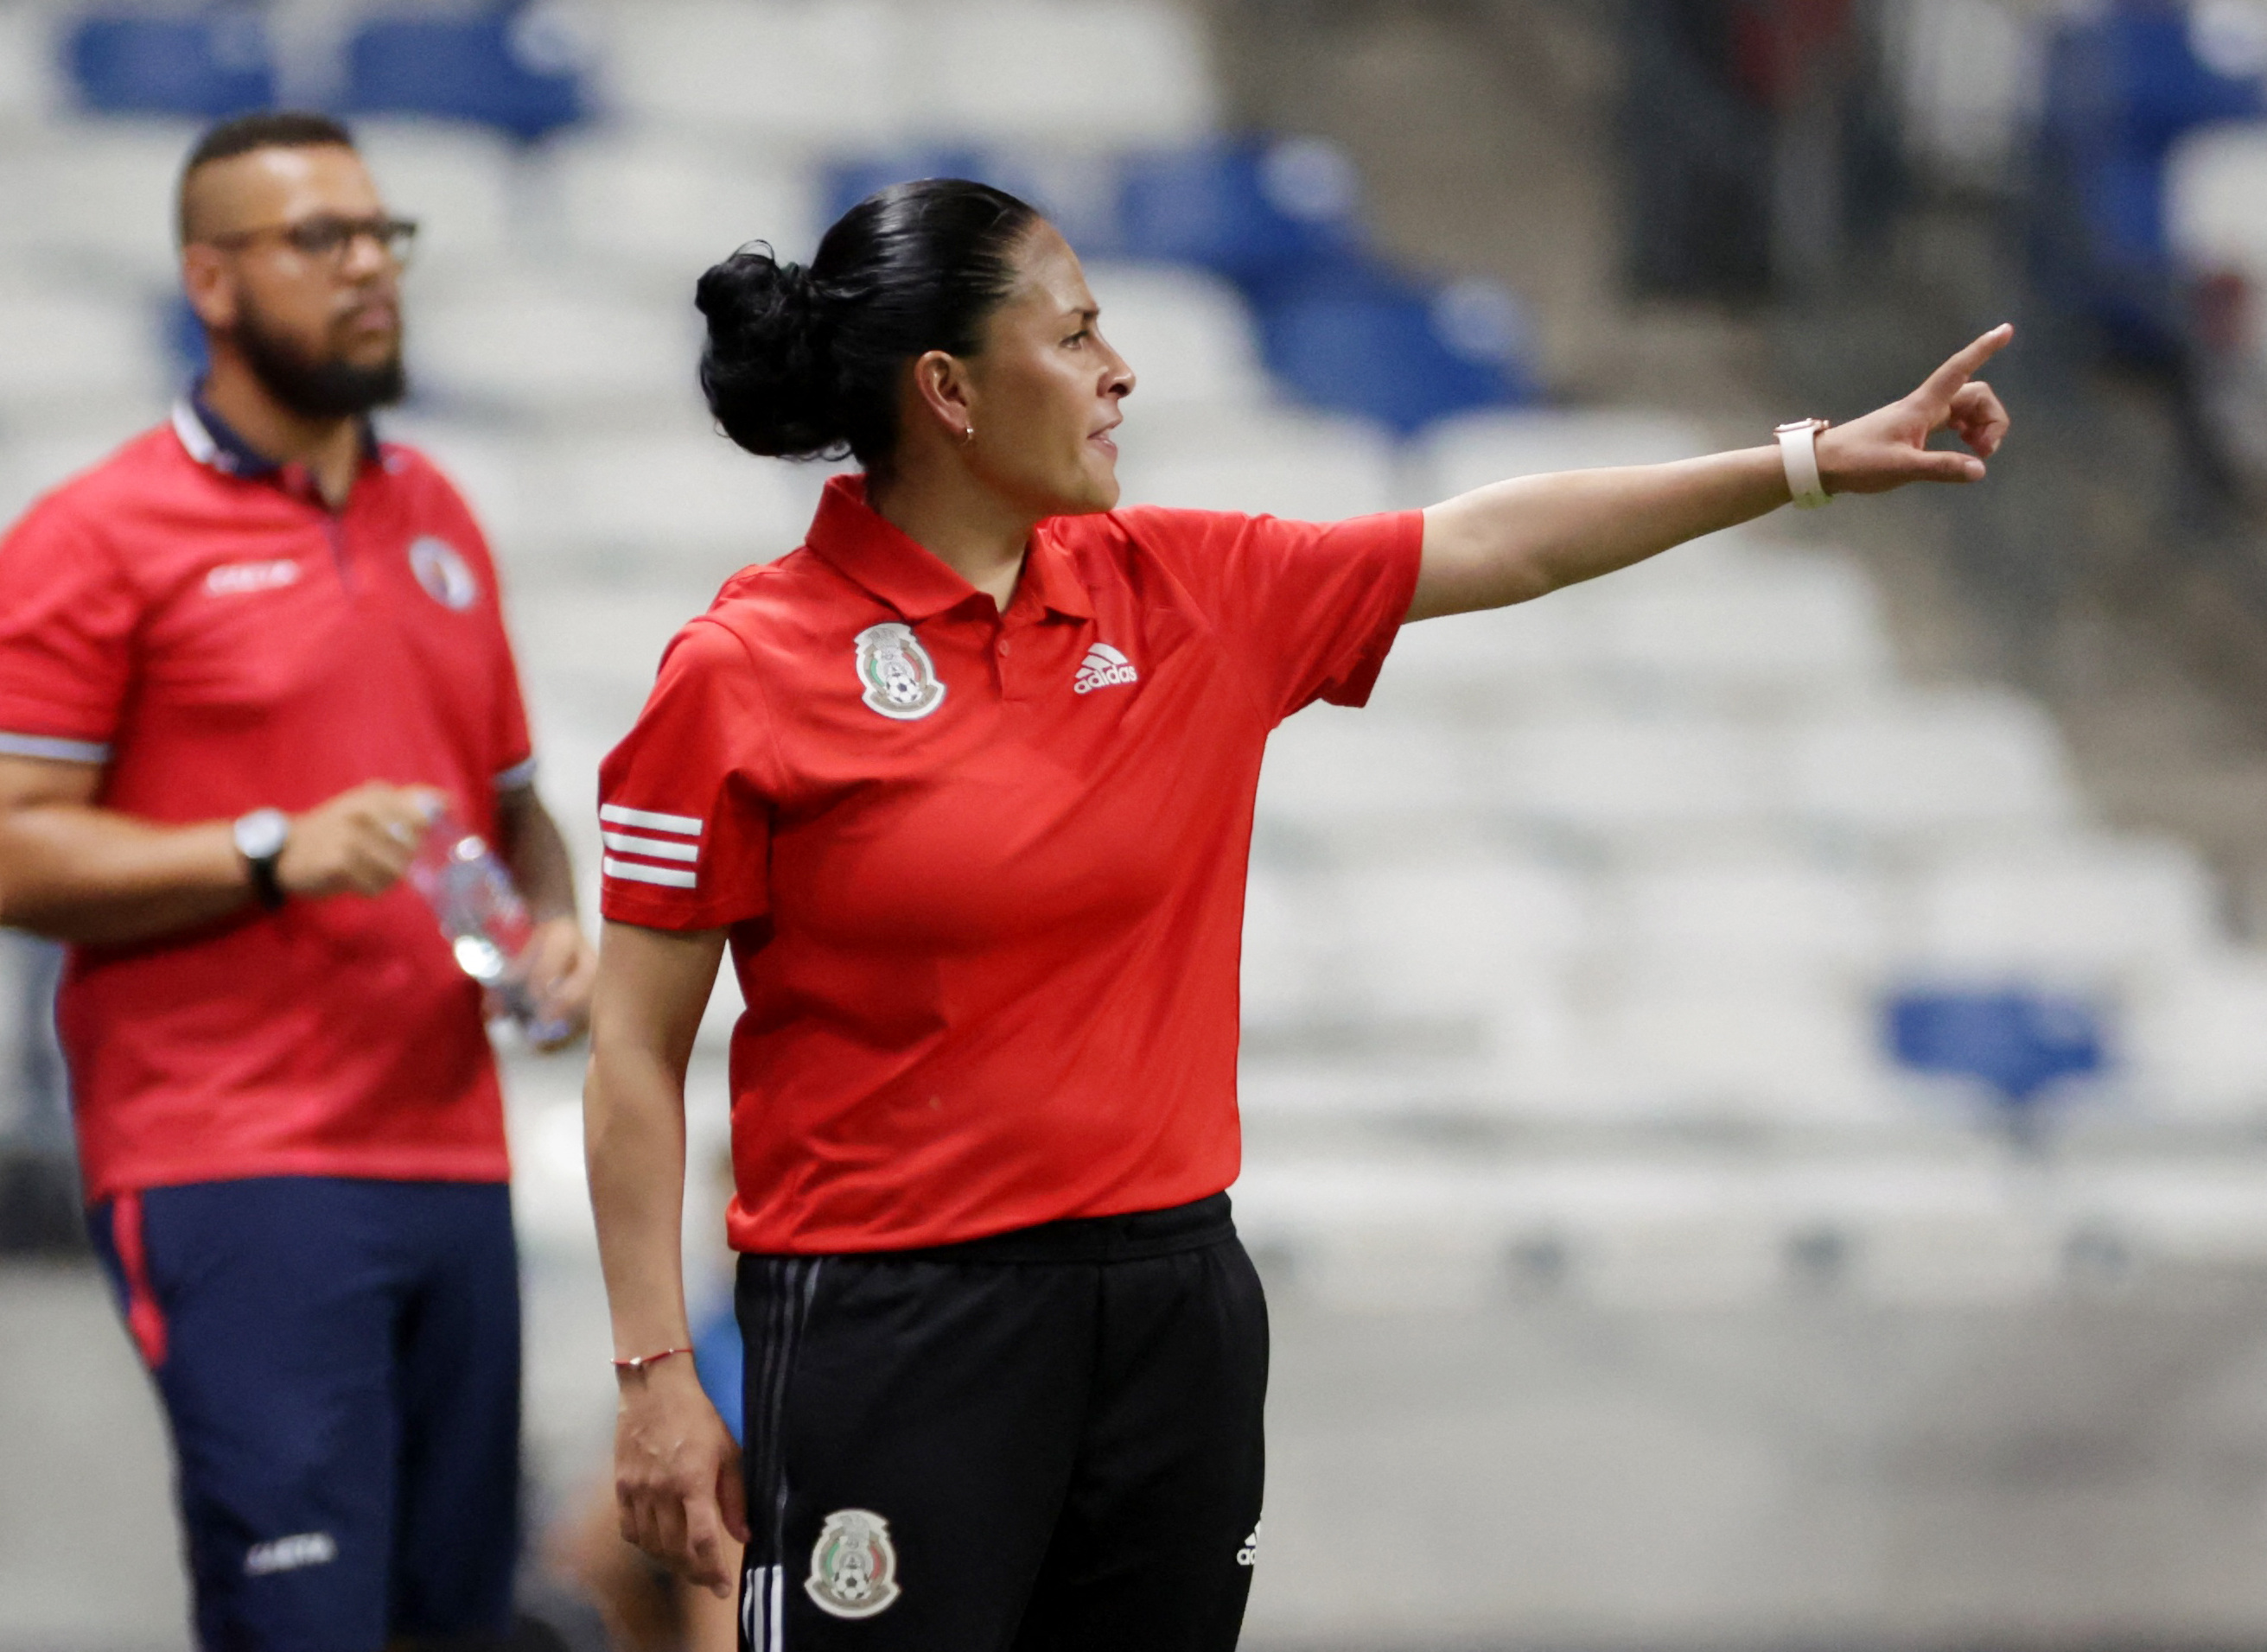 The dismissal of Monica Vergara is part of the restructuring of the Mexican national team teams (Image: Reuters / Pilar Olivares)